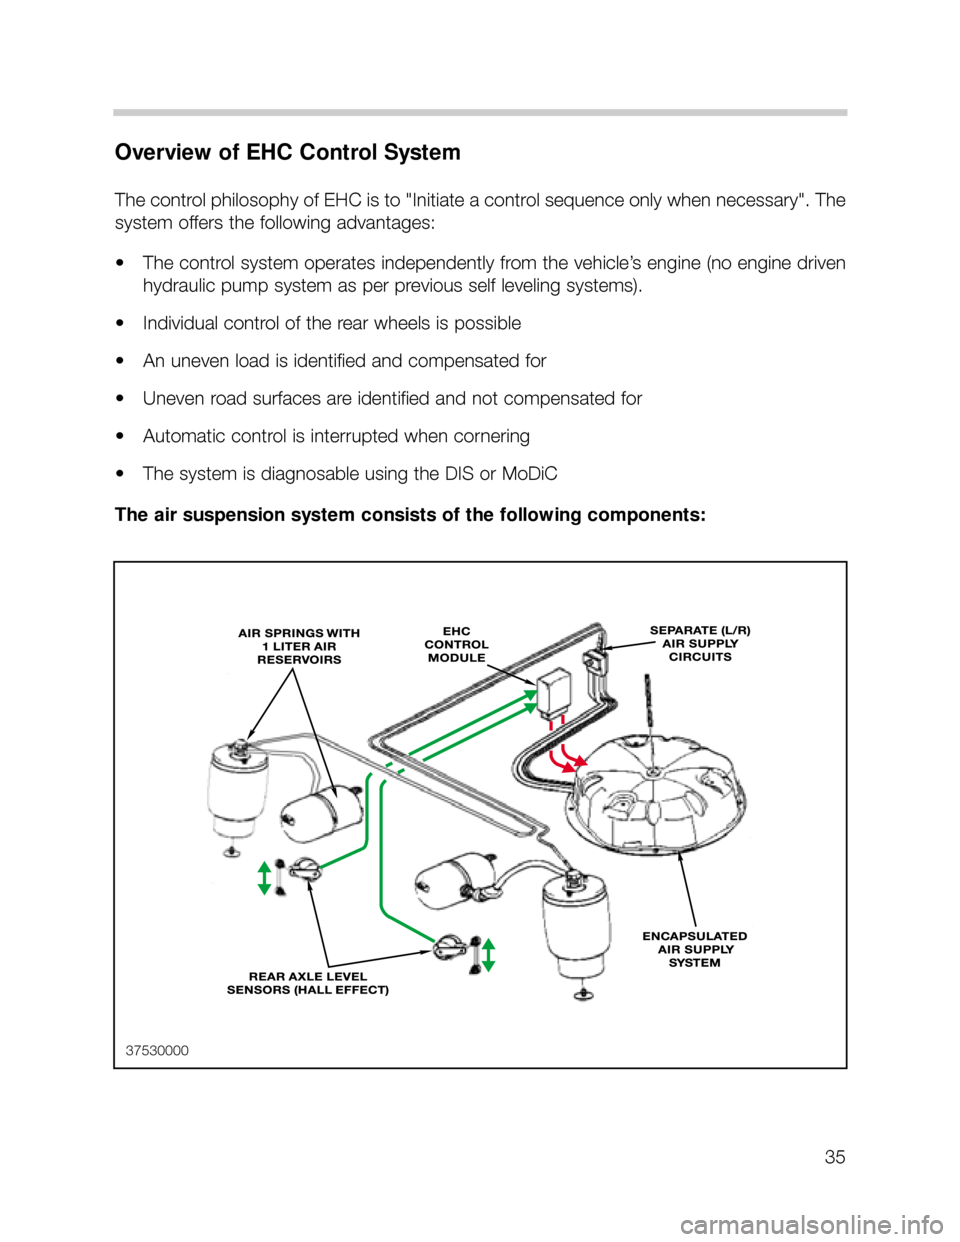 BMW X5 2001 E53 Workshop Manual 35
Overview of EHC Control System
The control philosophy of EHC is to "Initiate a control sequence only when necessary". The
system offers the following advantages:
• The control system operates ind